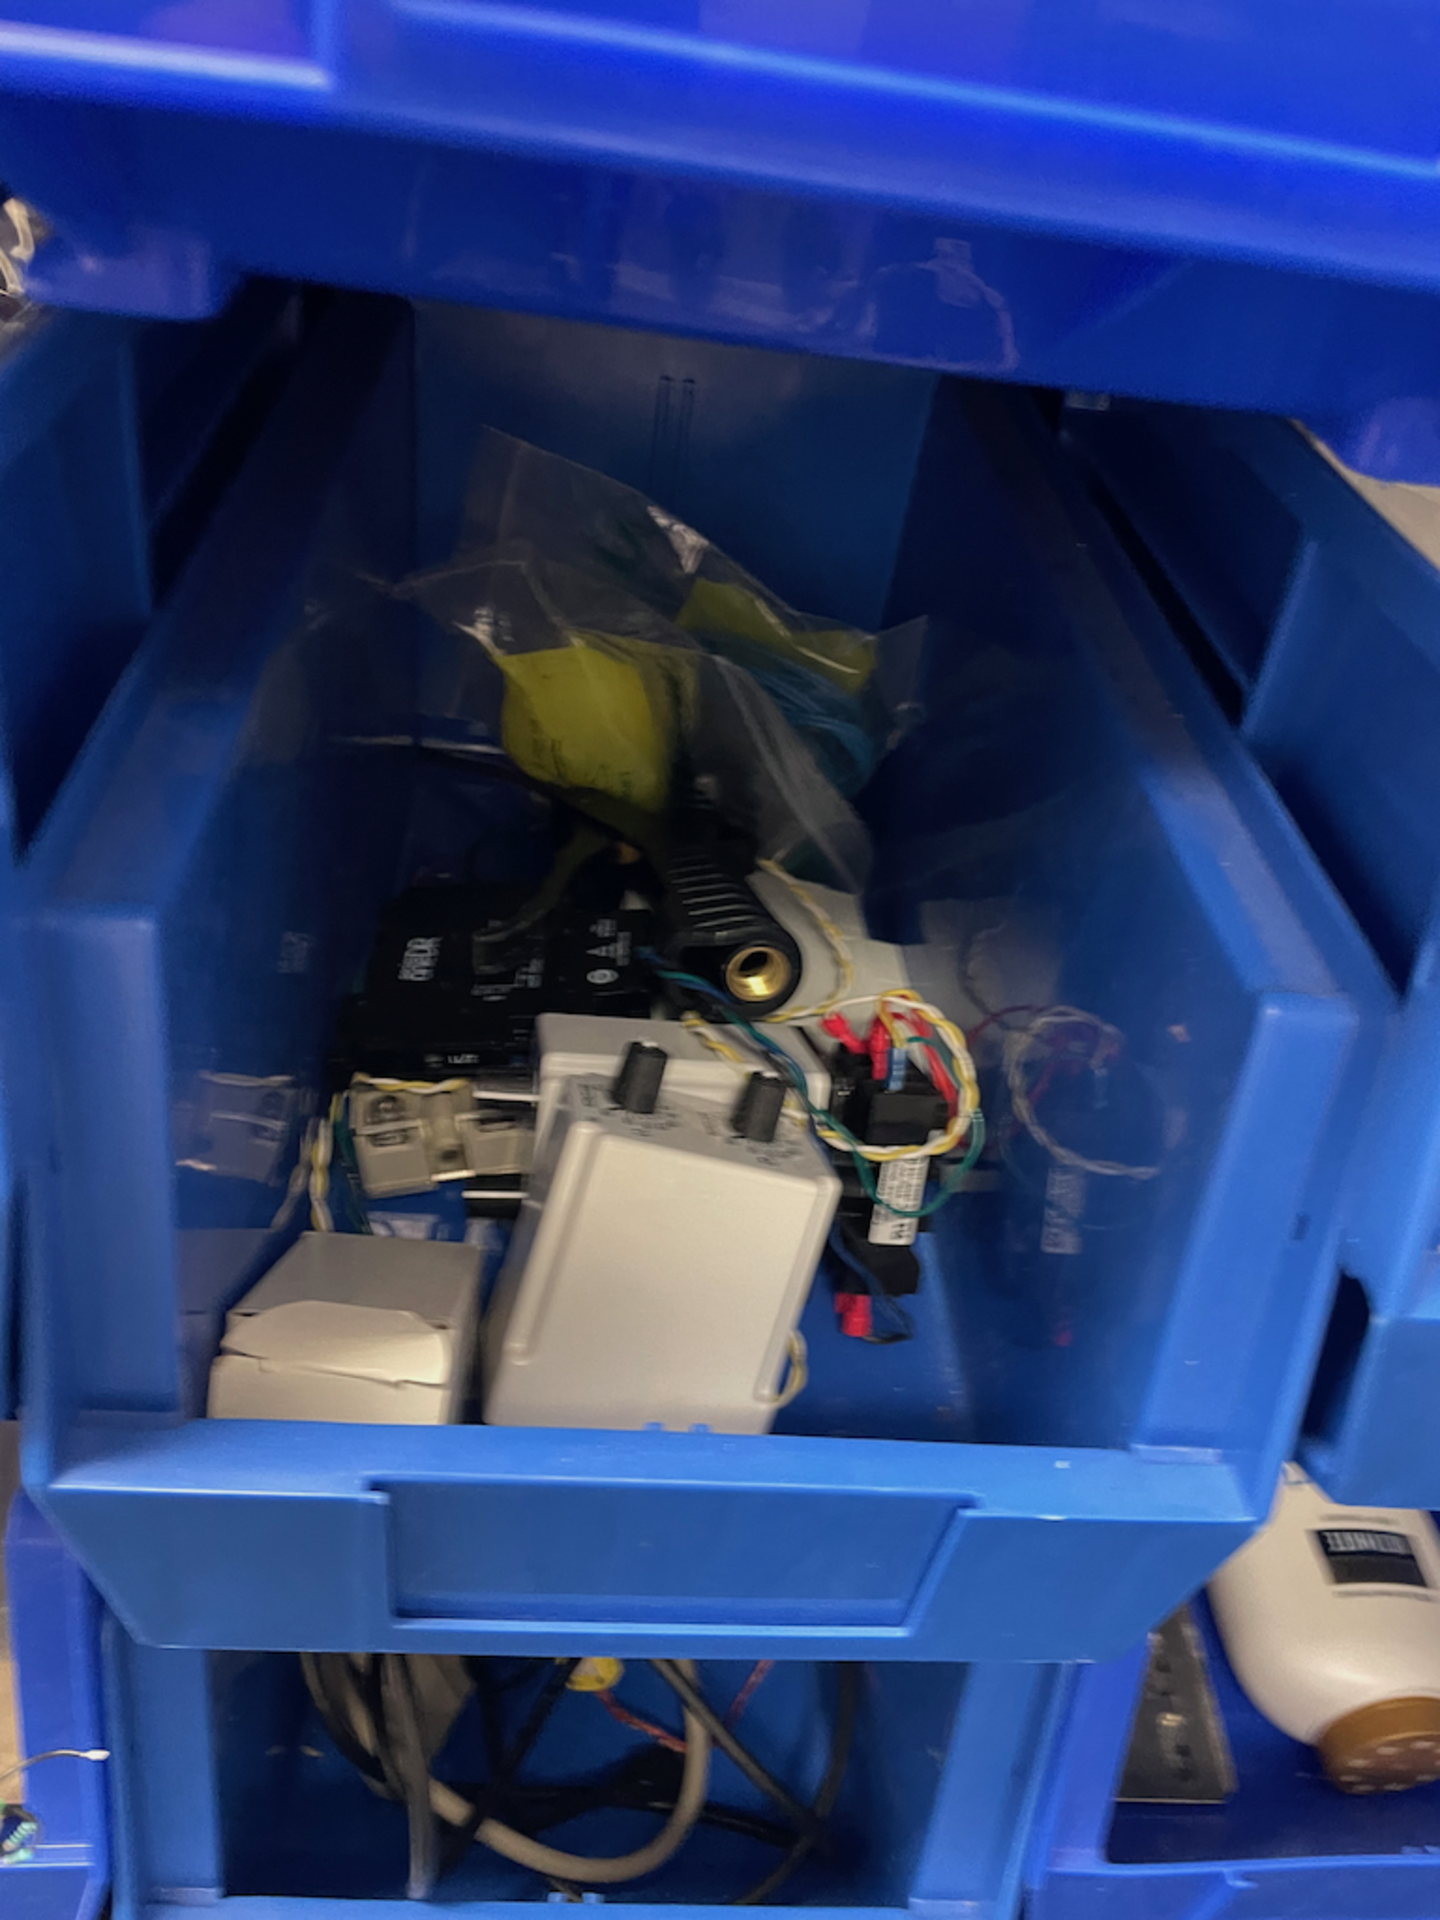 PORTABLE ULINE PARTS RACK WITH CONTENTS OF BLUE TOTES - Image 6 of 22